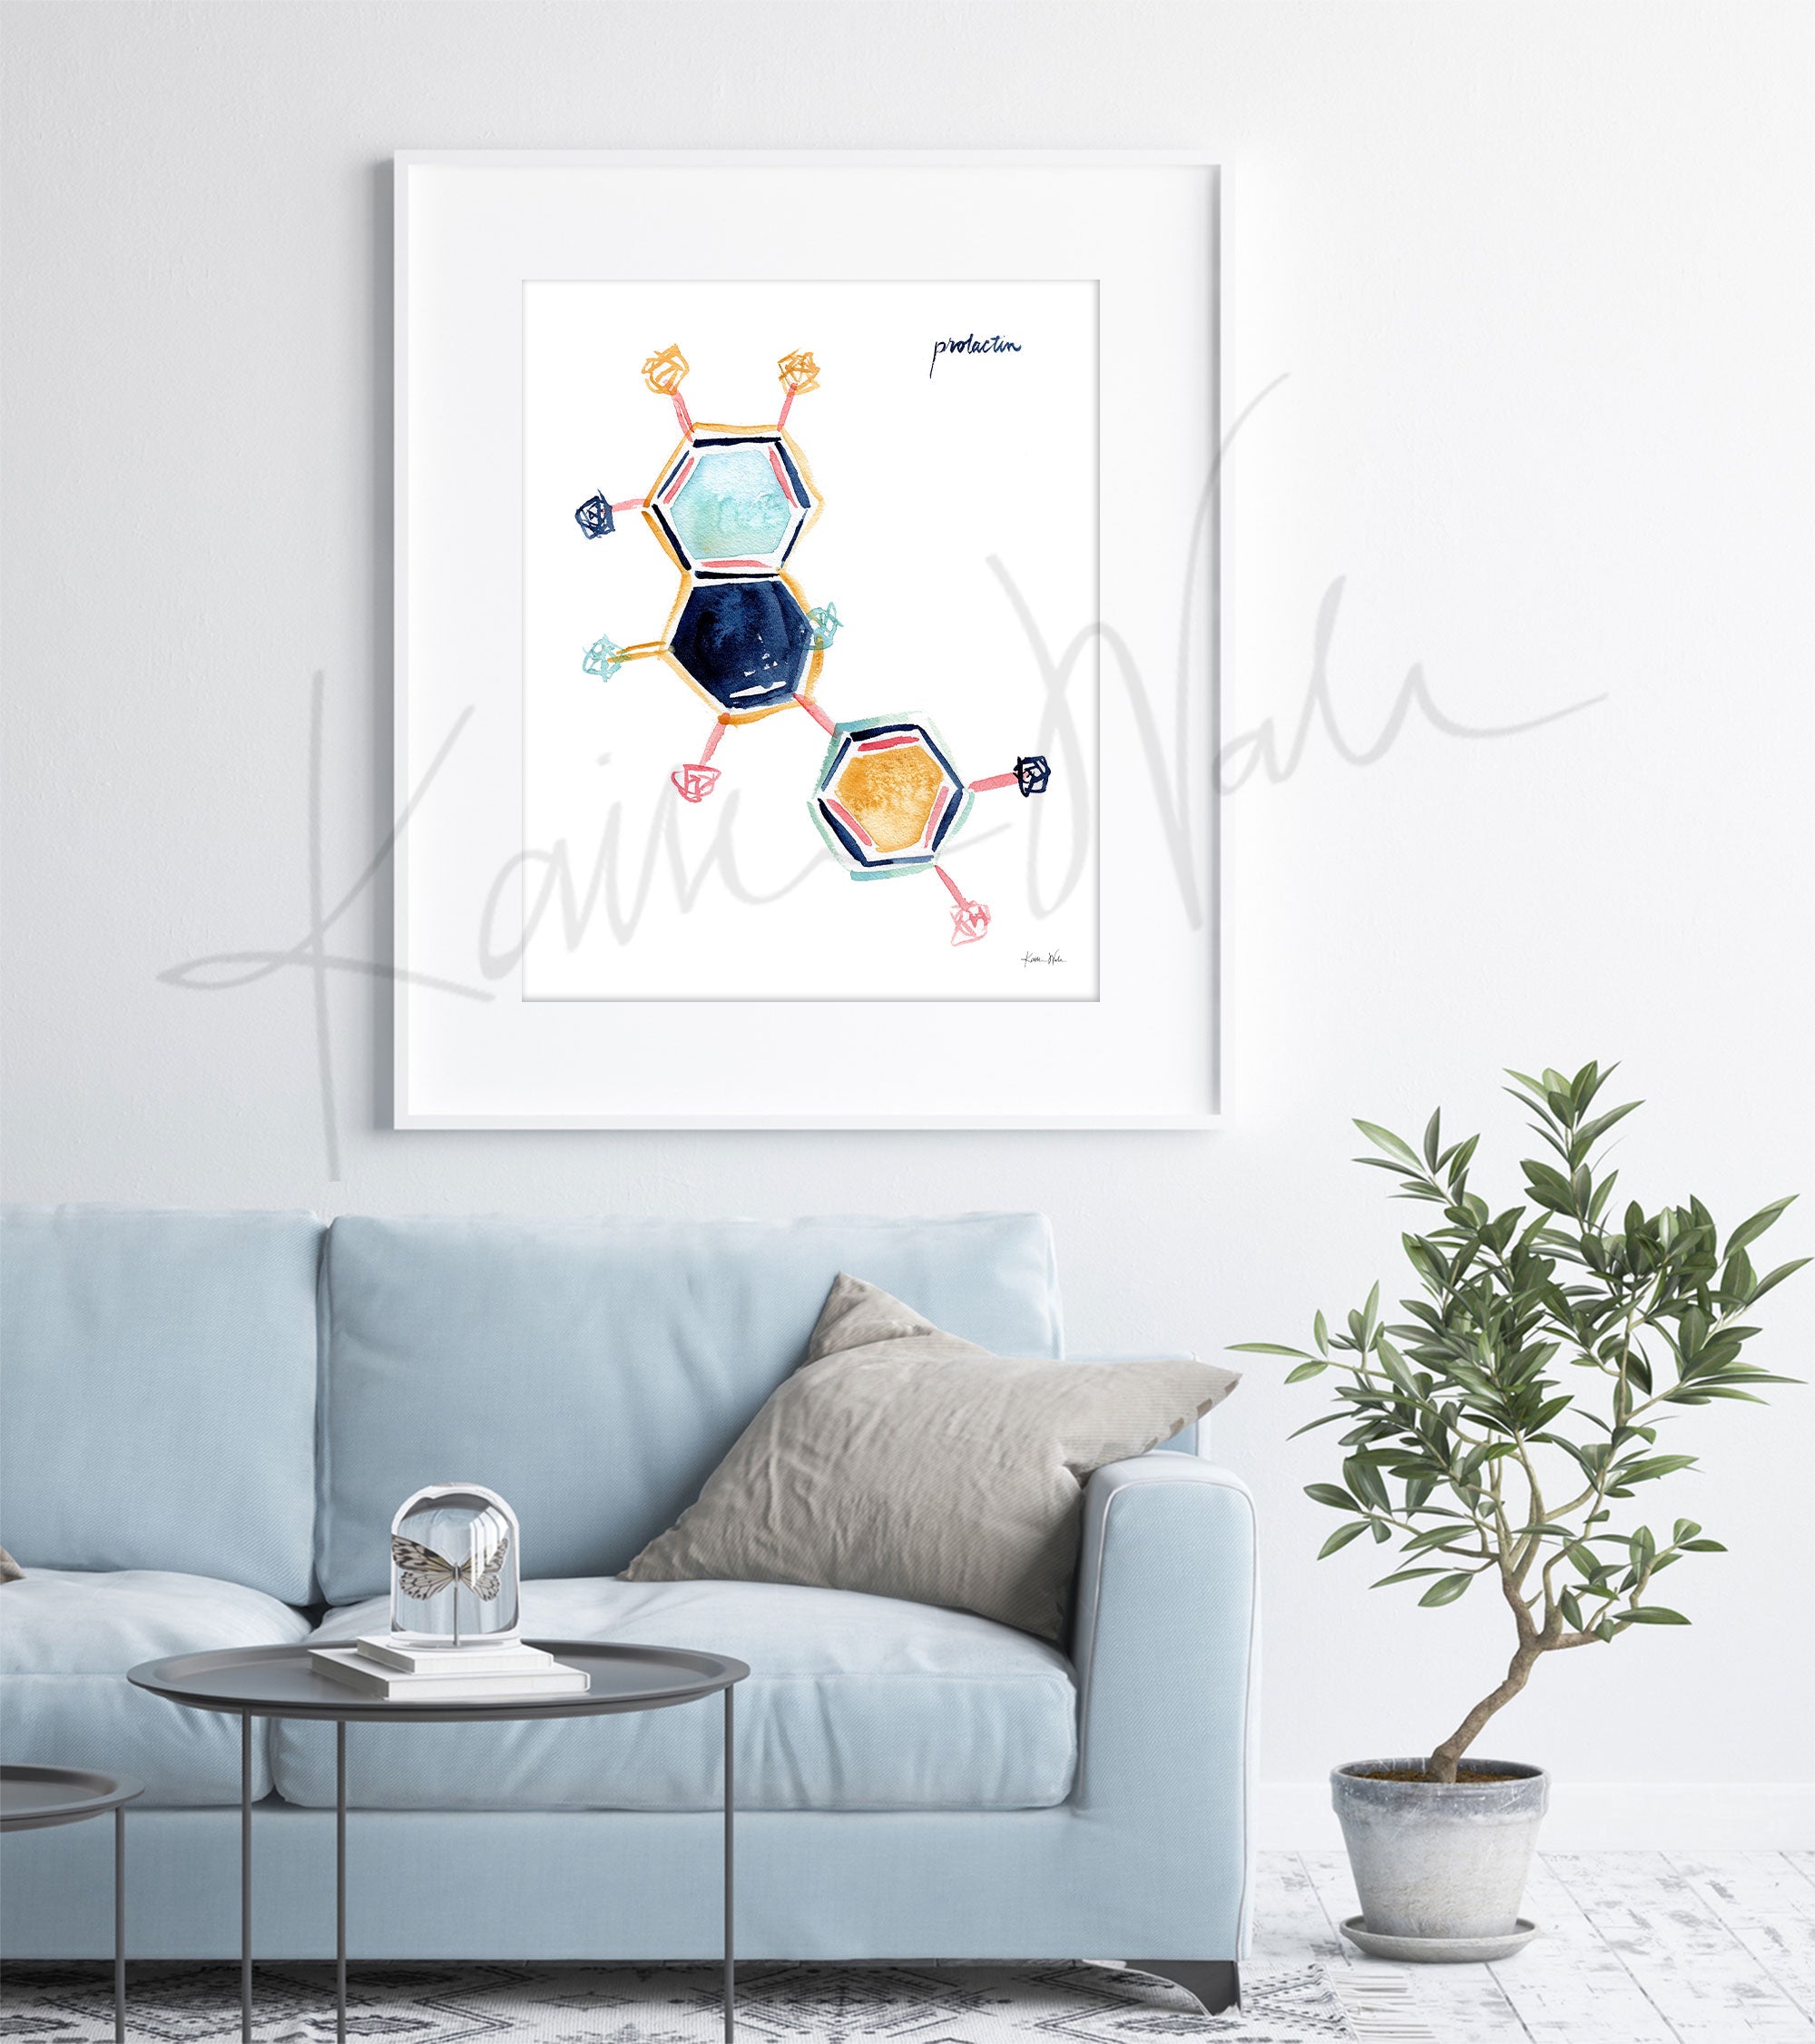 Framed watercolor painting of prolactin hormone molecular structure The painting is hanging over a blue couch.